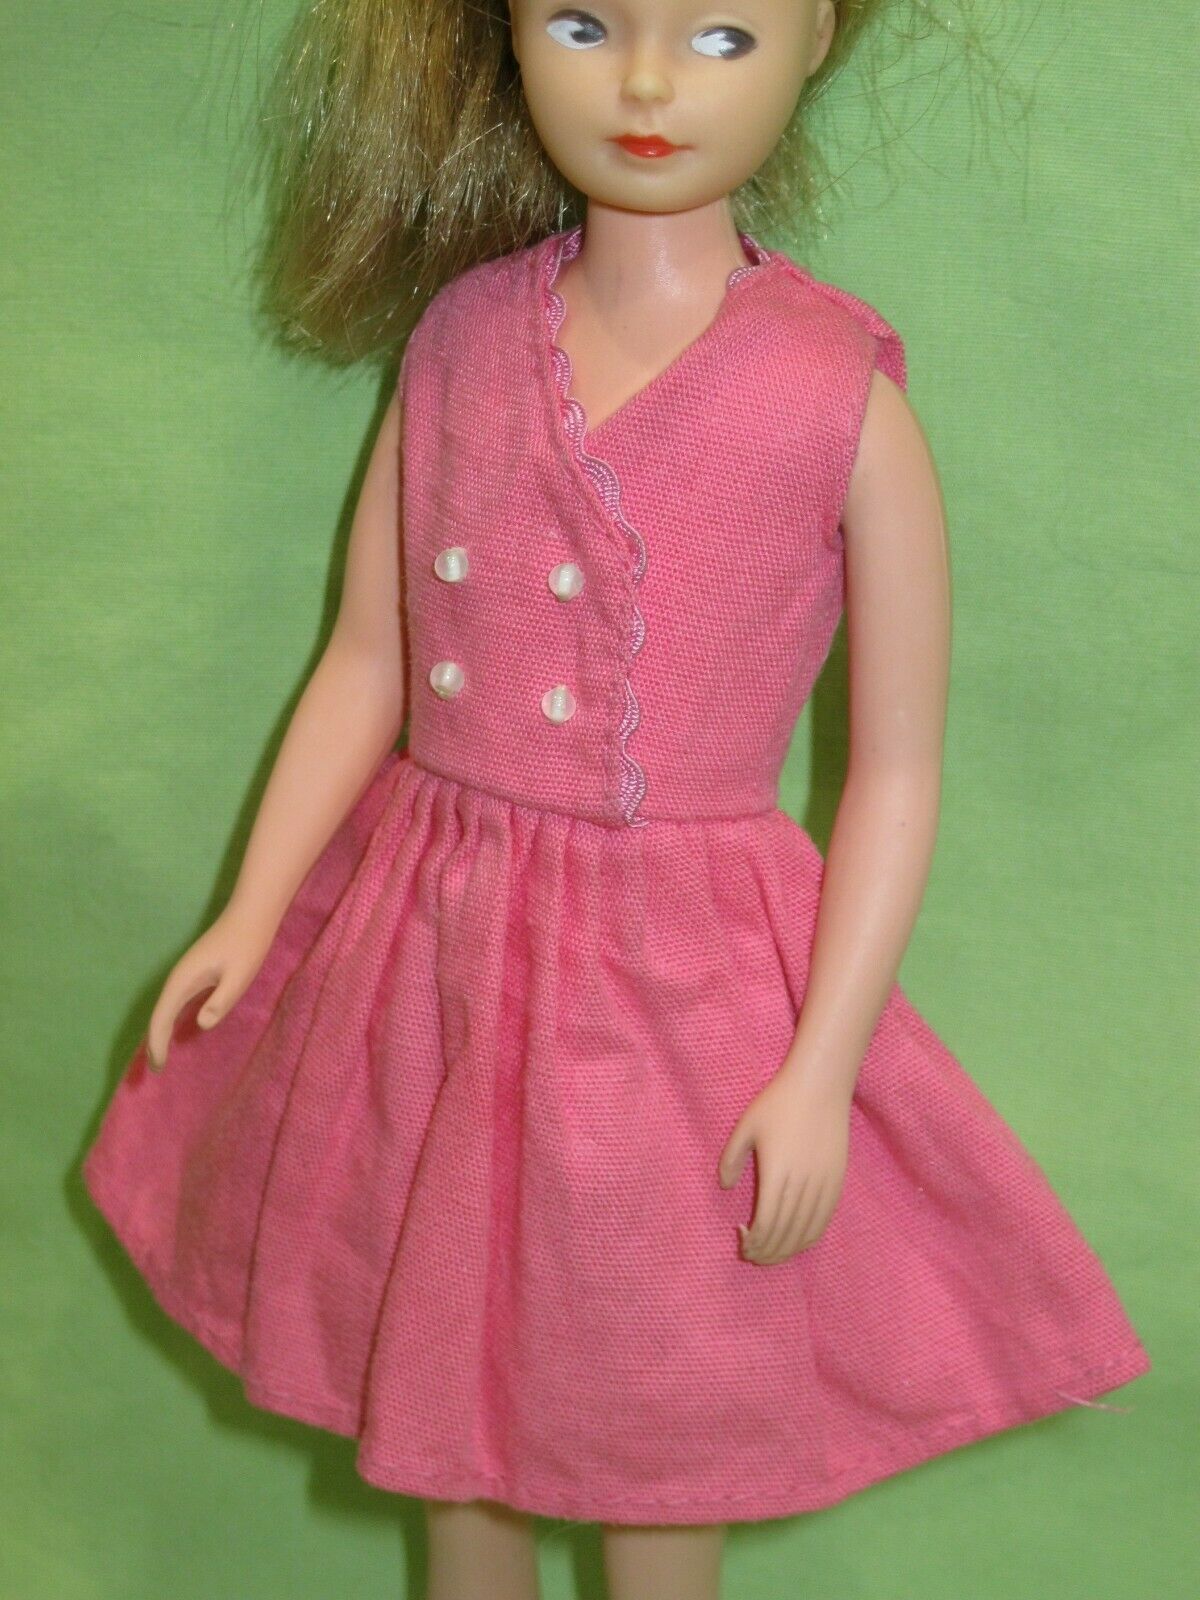 American Character Vintage 1960's Tressy Sister Cricket Doll Fun And Fancy Dress